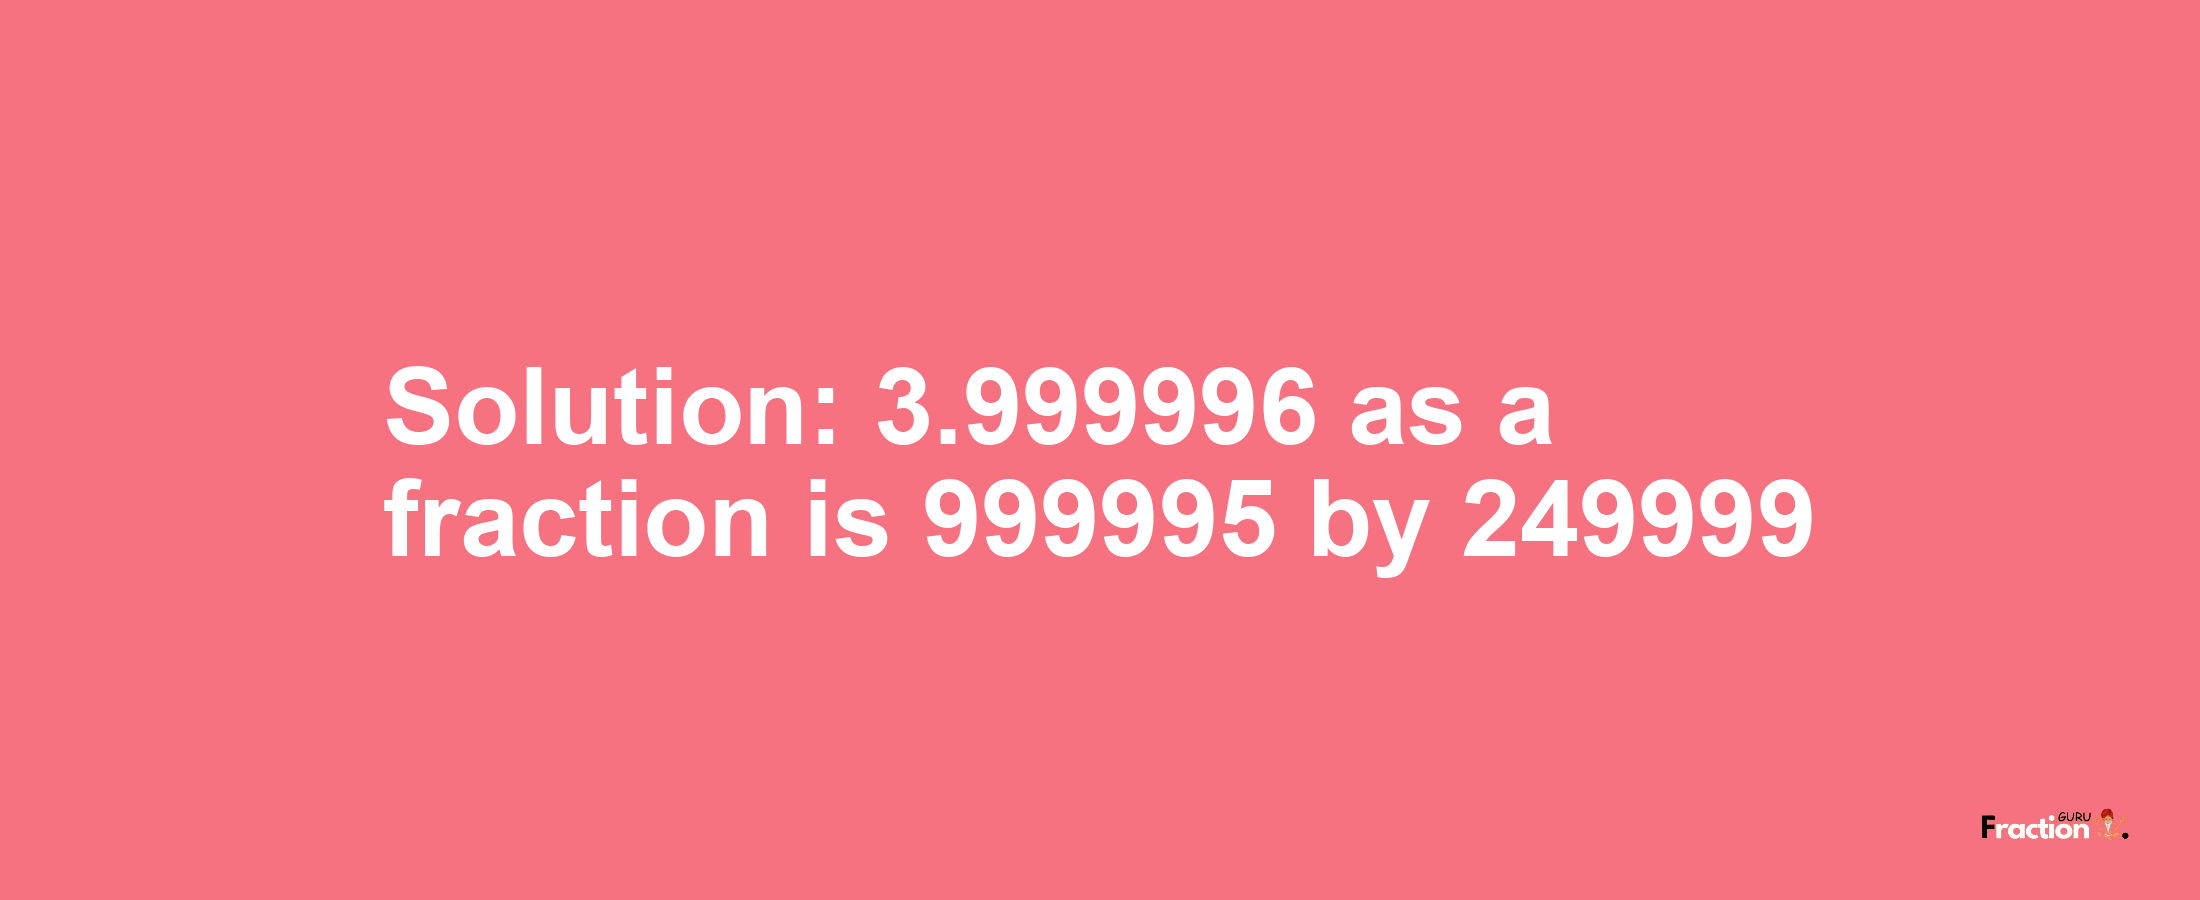 Solution:3.999996 as a fraction is 999995/249999